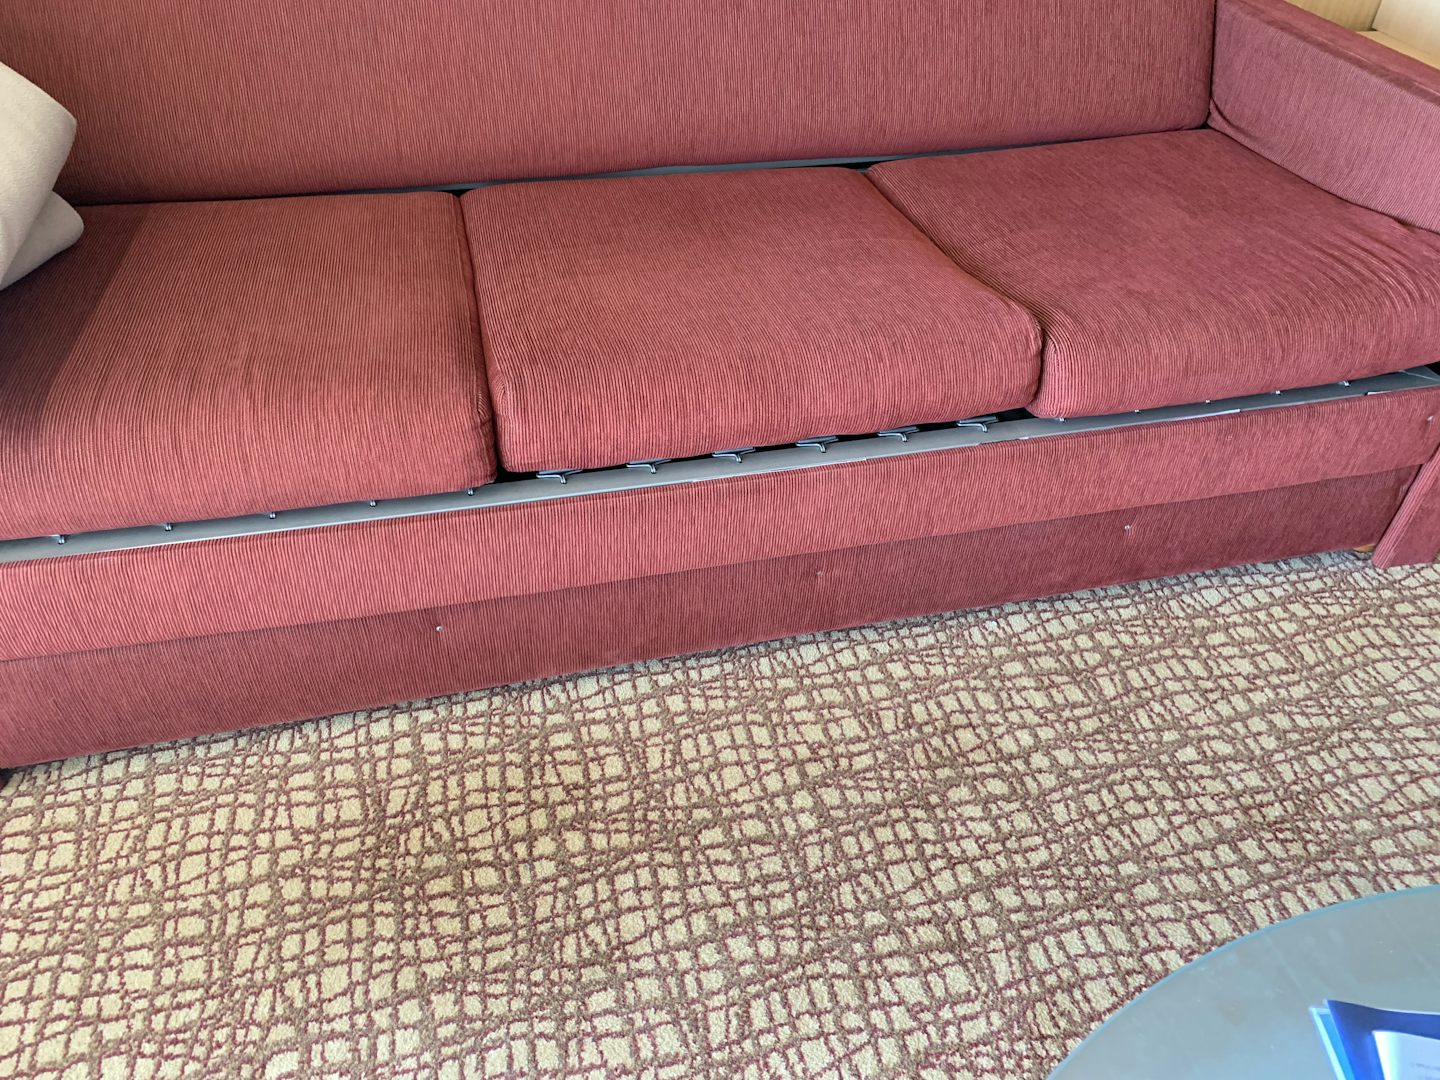 Worn out couch